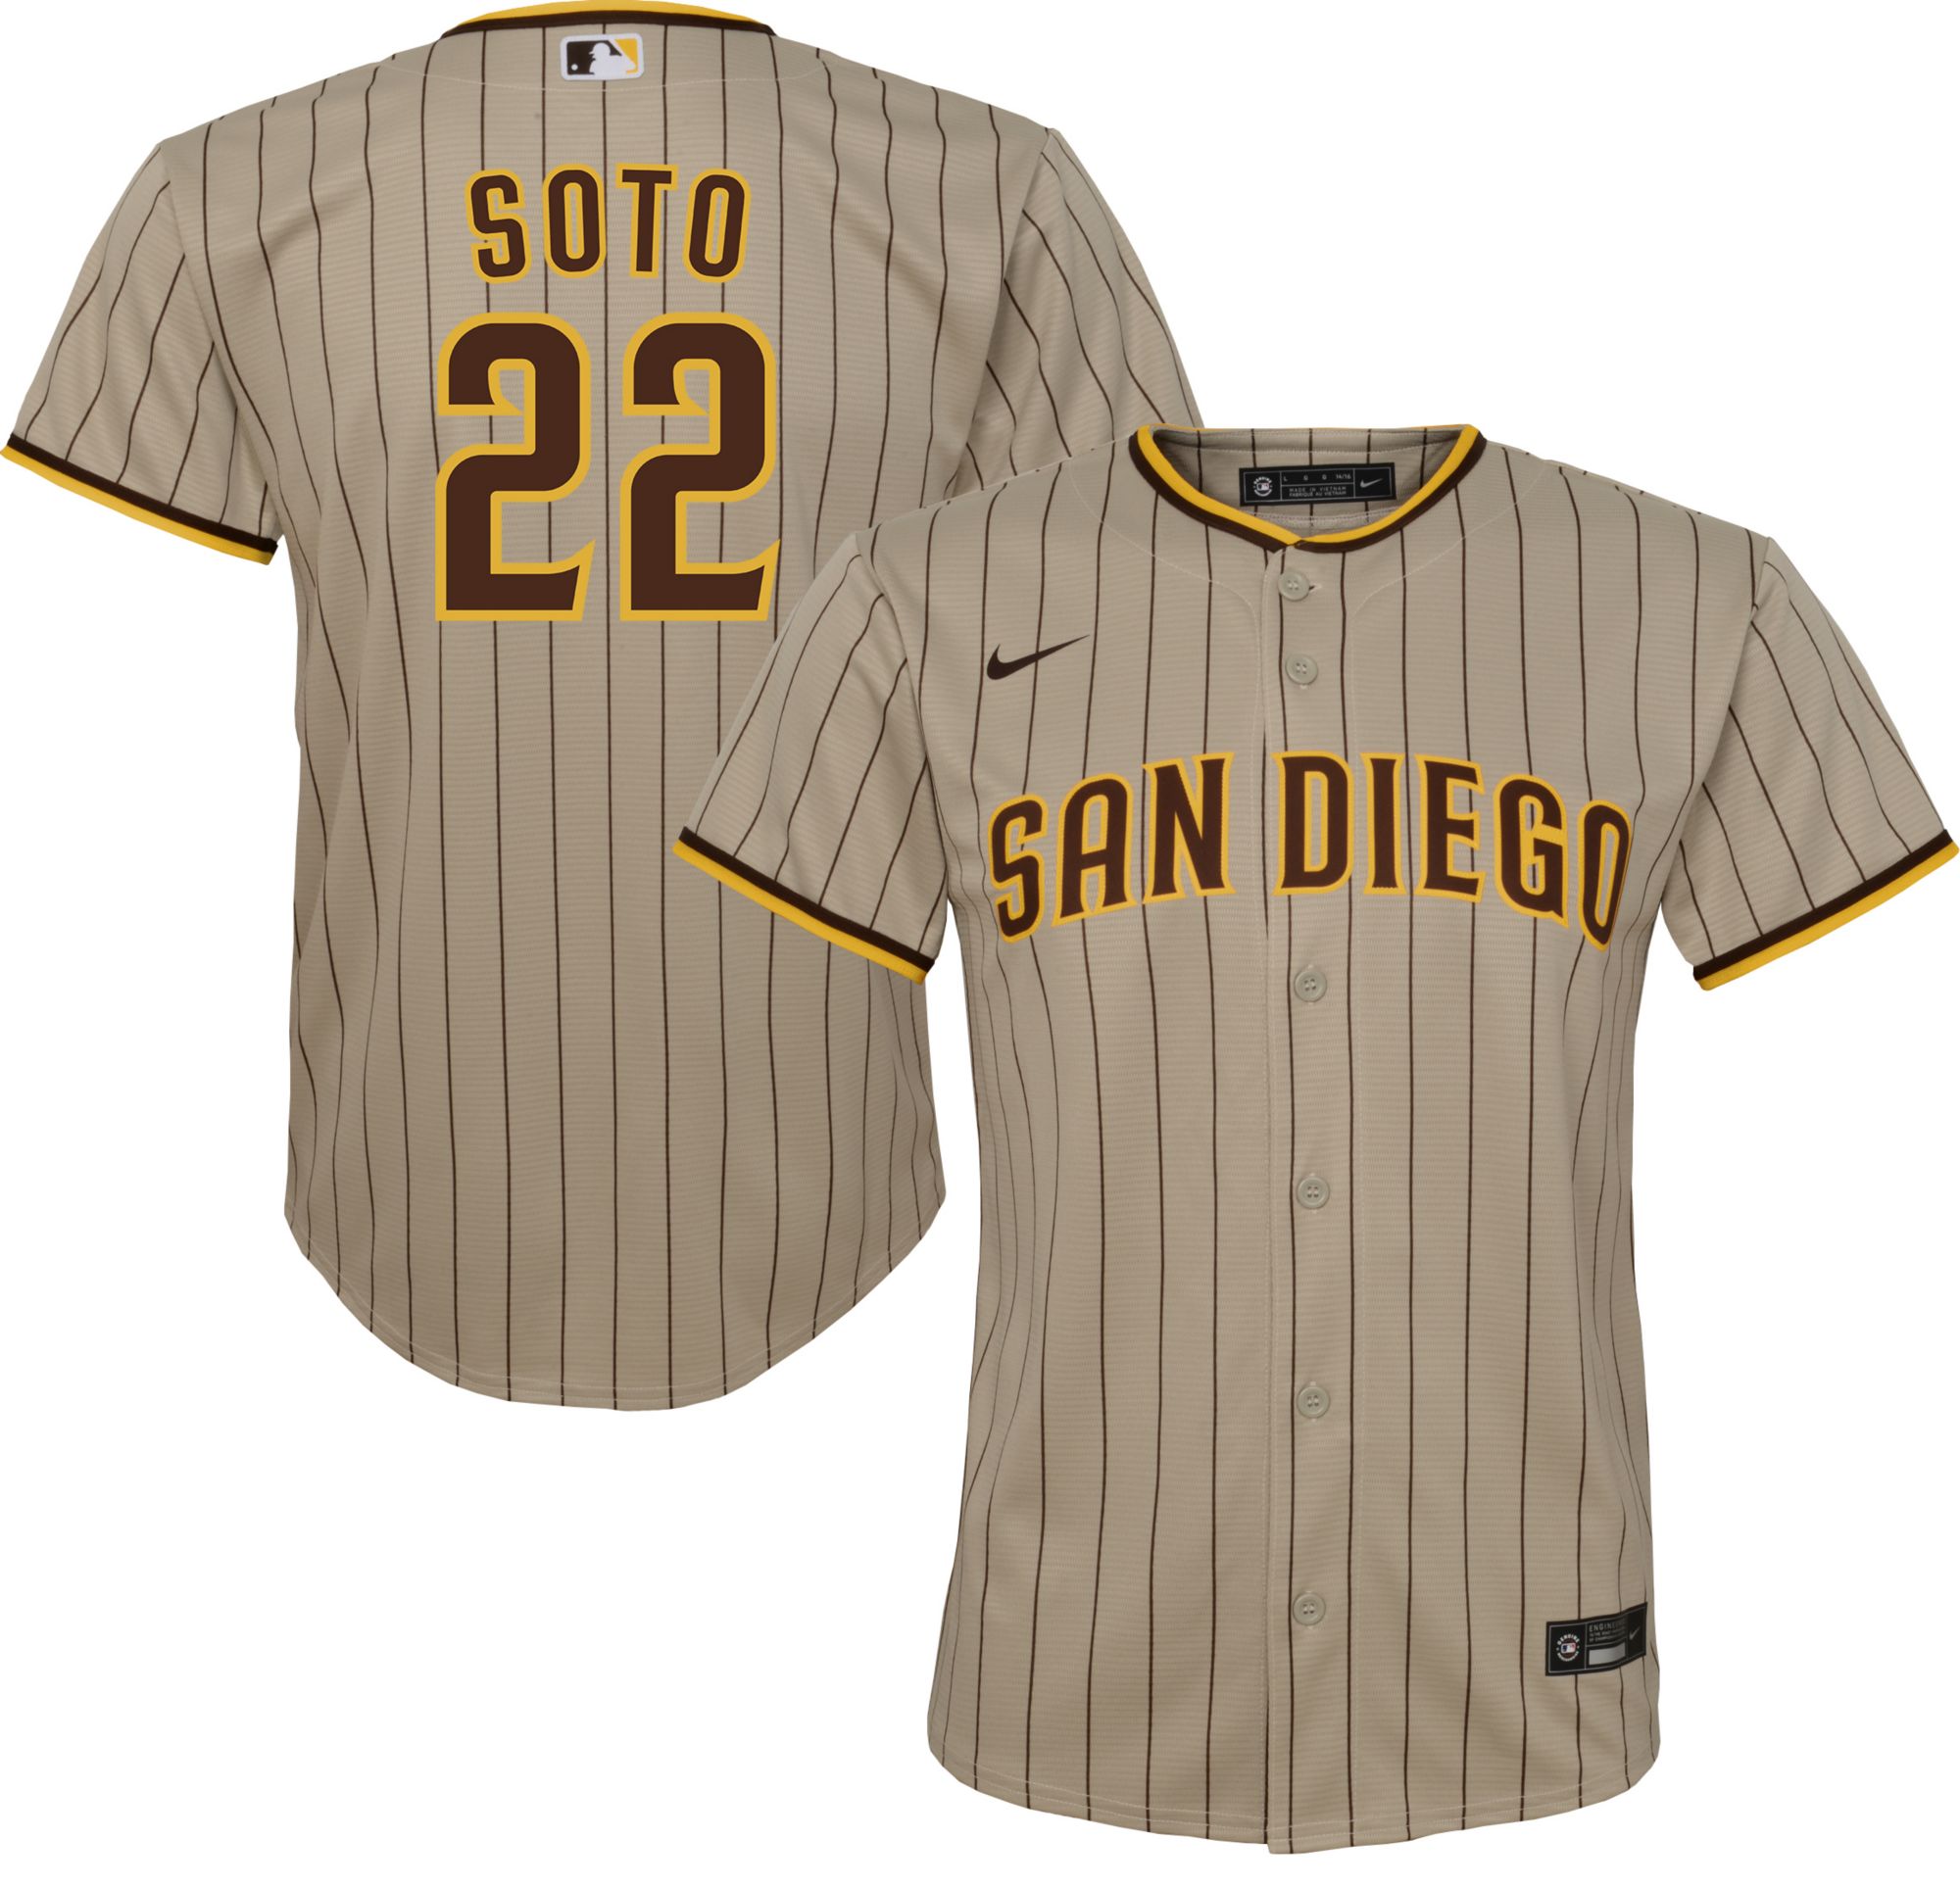 Authentic San Diego Padres Jerseys, Throwback San Diego Padres